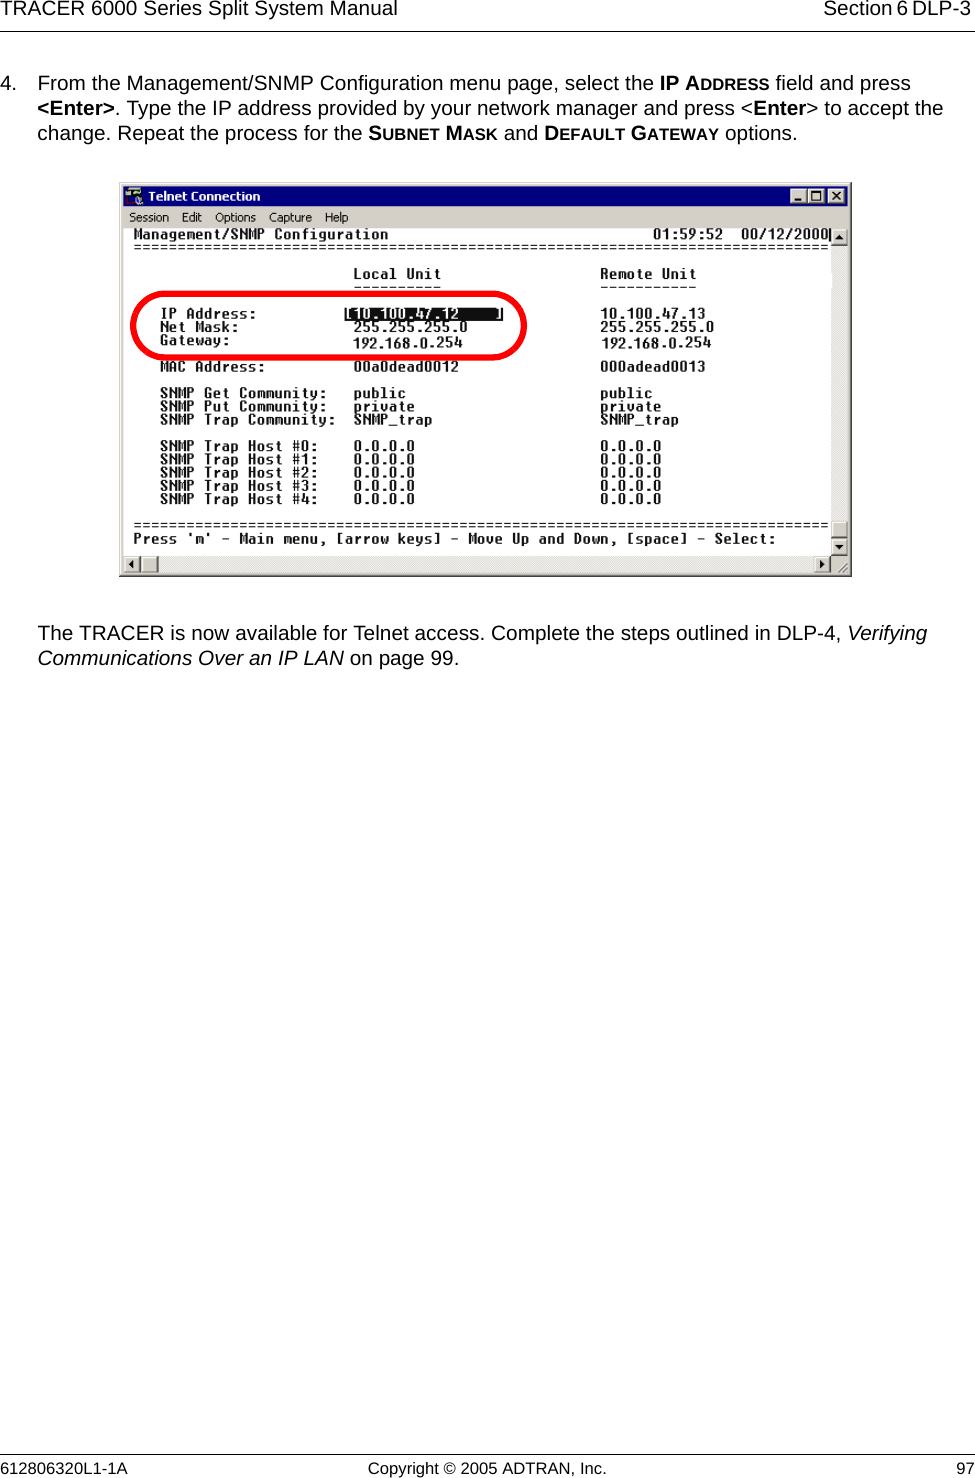 TRACER 6000 Series Split System Manual Section 6 DLP-3 612806320L1-1A Copyright © 2005 ADTRAN, Inc. 974. From the Management/SNMP Configuration menu page, select the IP ADDRESS field and press &lt;Enter&gt;. Type the IP address provided by your network manager and press &lt;Enter&gt; to accept the change. Repeat the process for the SUBNET MASK and DEFAULT GATEWAY options. The TRACER is now available for Telnet access. Complete the steps outlined in DLP-4, Verifying Communications Over an IP LAN on page 99.